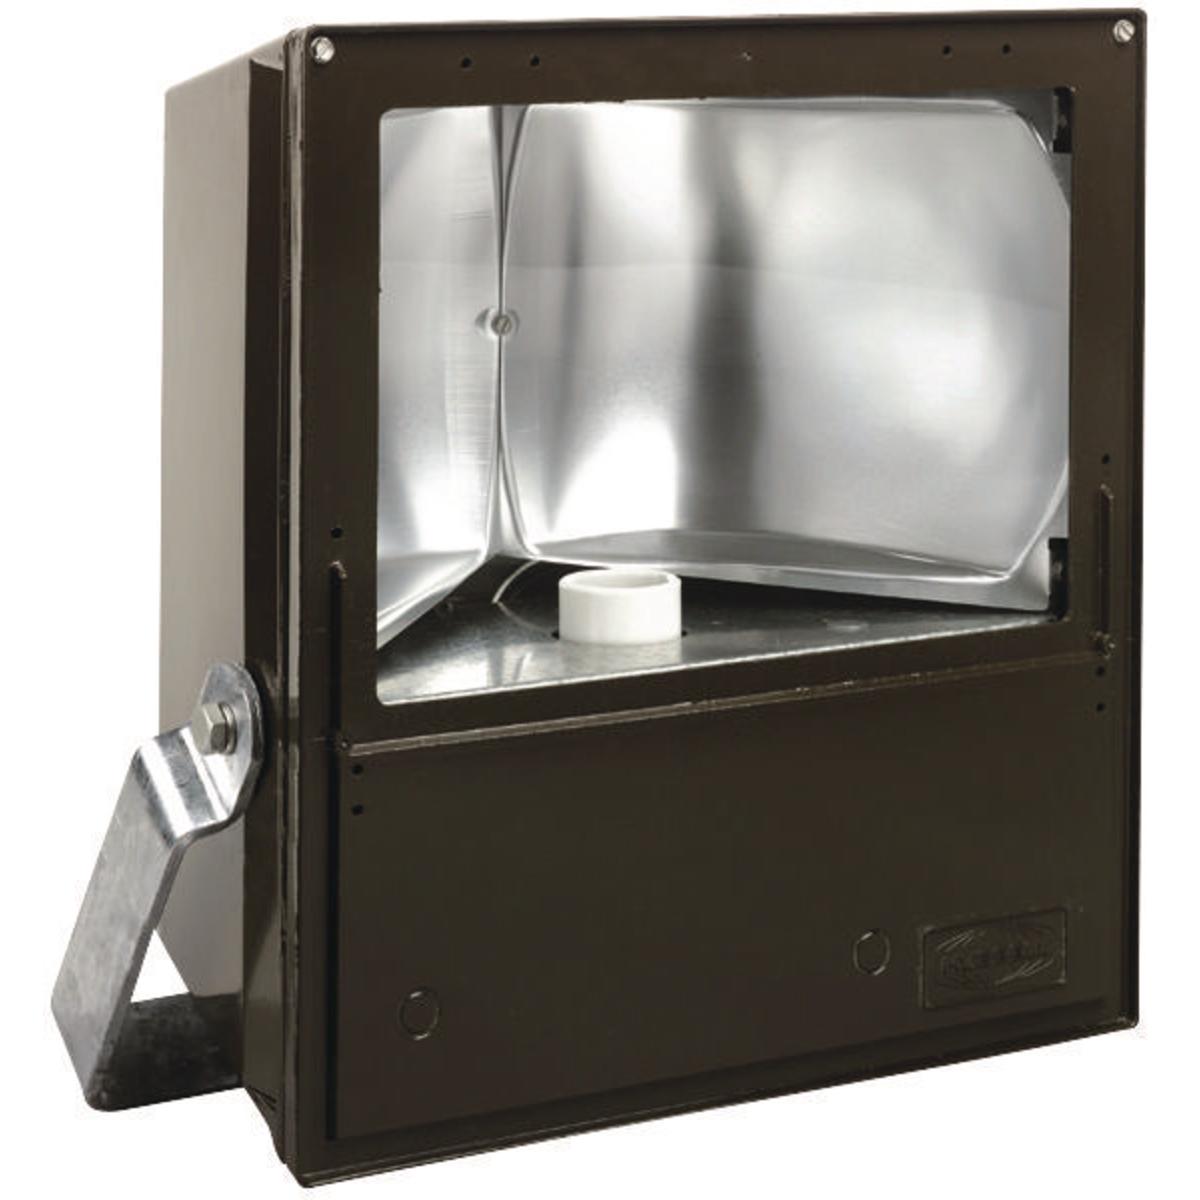 Hubbell KFS400-76 KF Series - Aluminum 400 Watt High Pressure Sodium Marine Floodlight(Lamp Not Included) - Quadri-Volt (120/208/240/277V) At 60Hz  ; Rugged weathertight housing of copperfree aluminum with corrosion resistant bronze finish ; Wide beam distribution ; Therma